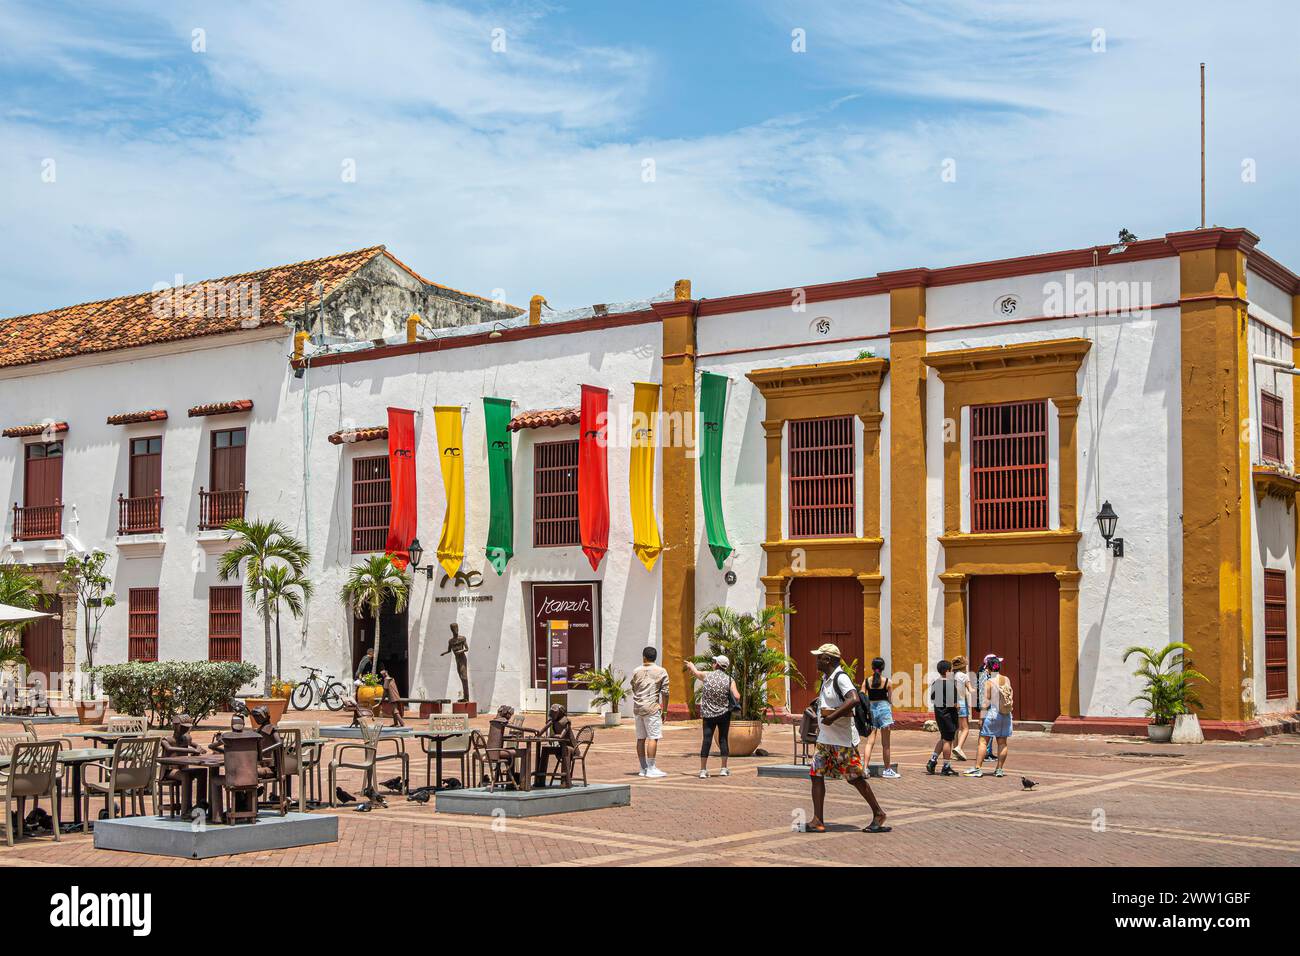 Cartagena, Colombia - July 25, 2023: Plaza de San Pedro Claver, square. Museo del arte moderno, modern art museum with flags, metal artwork and coloni Stock Photo